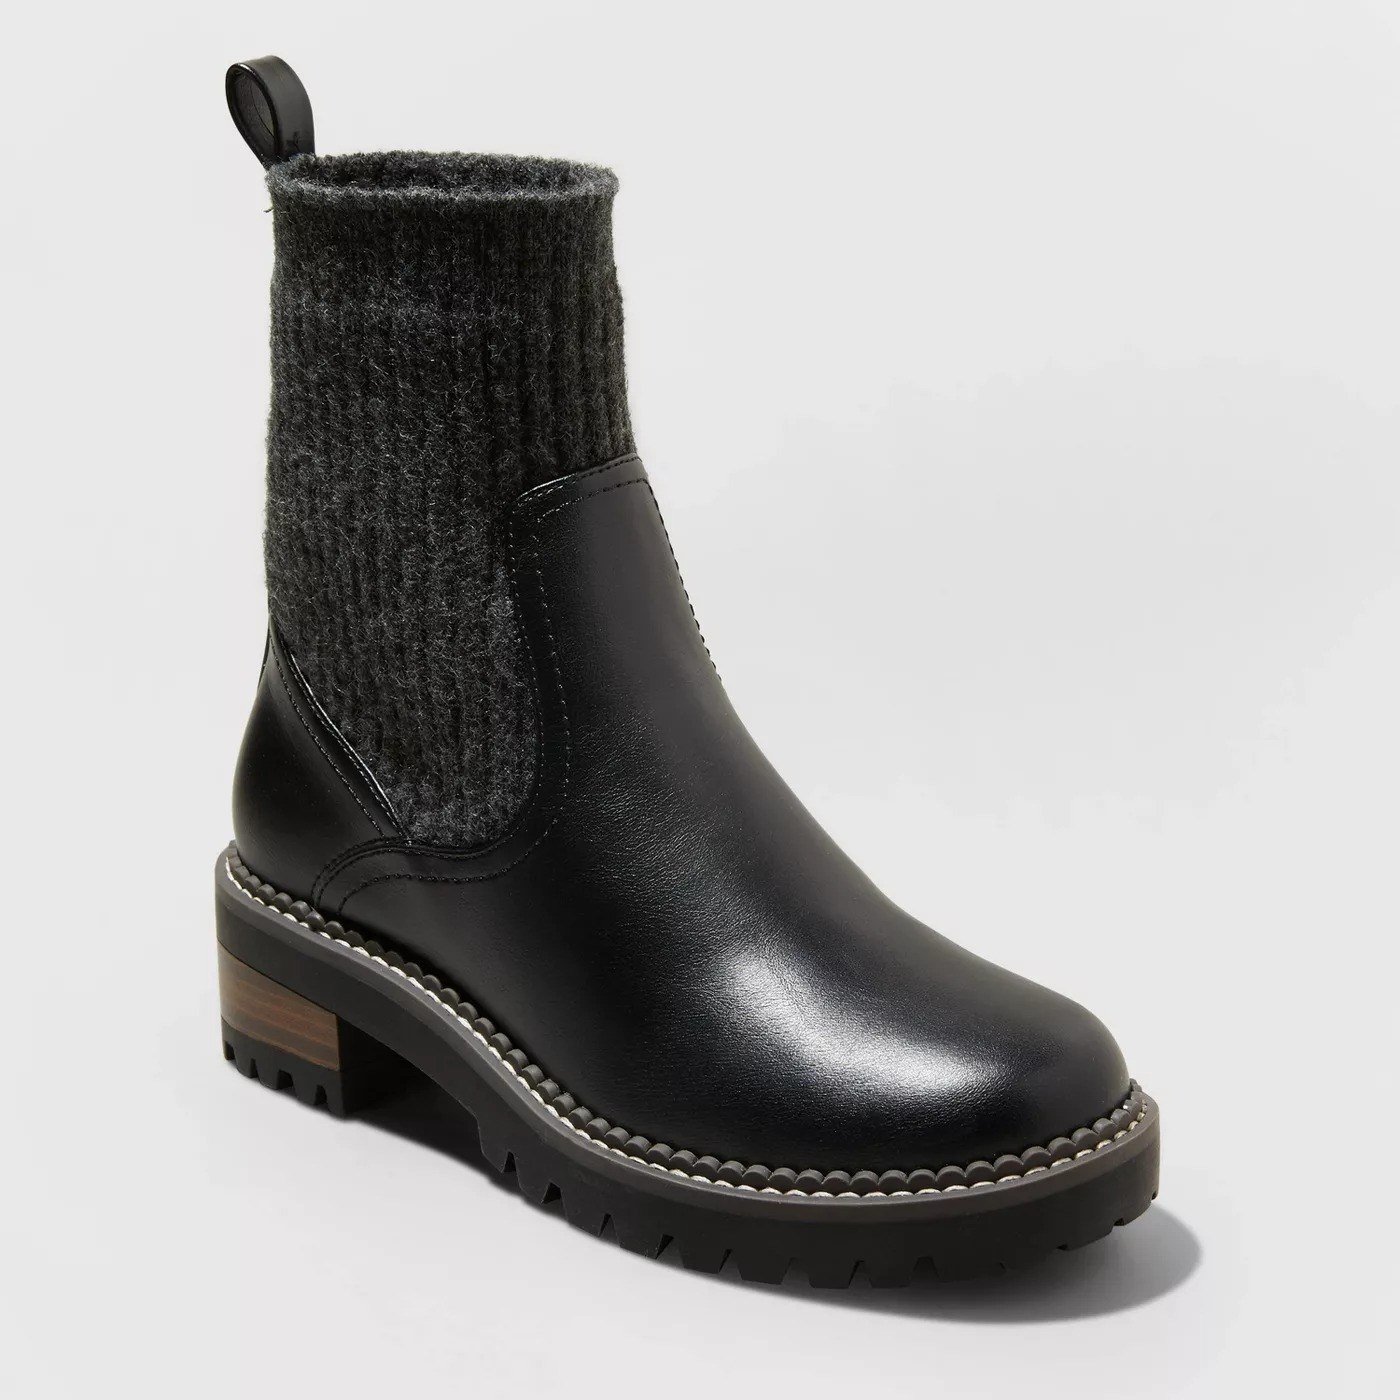 The black boot with brown heel